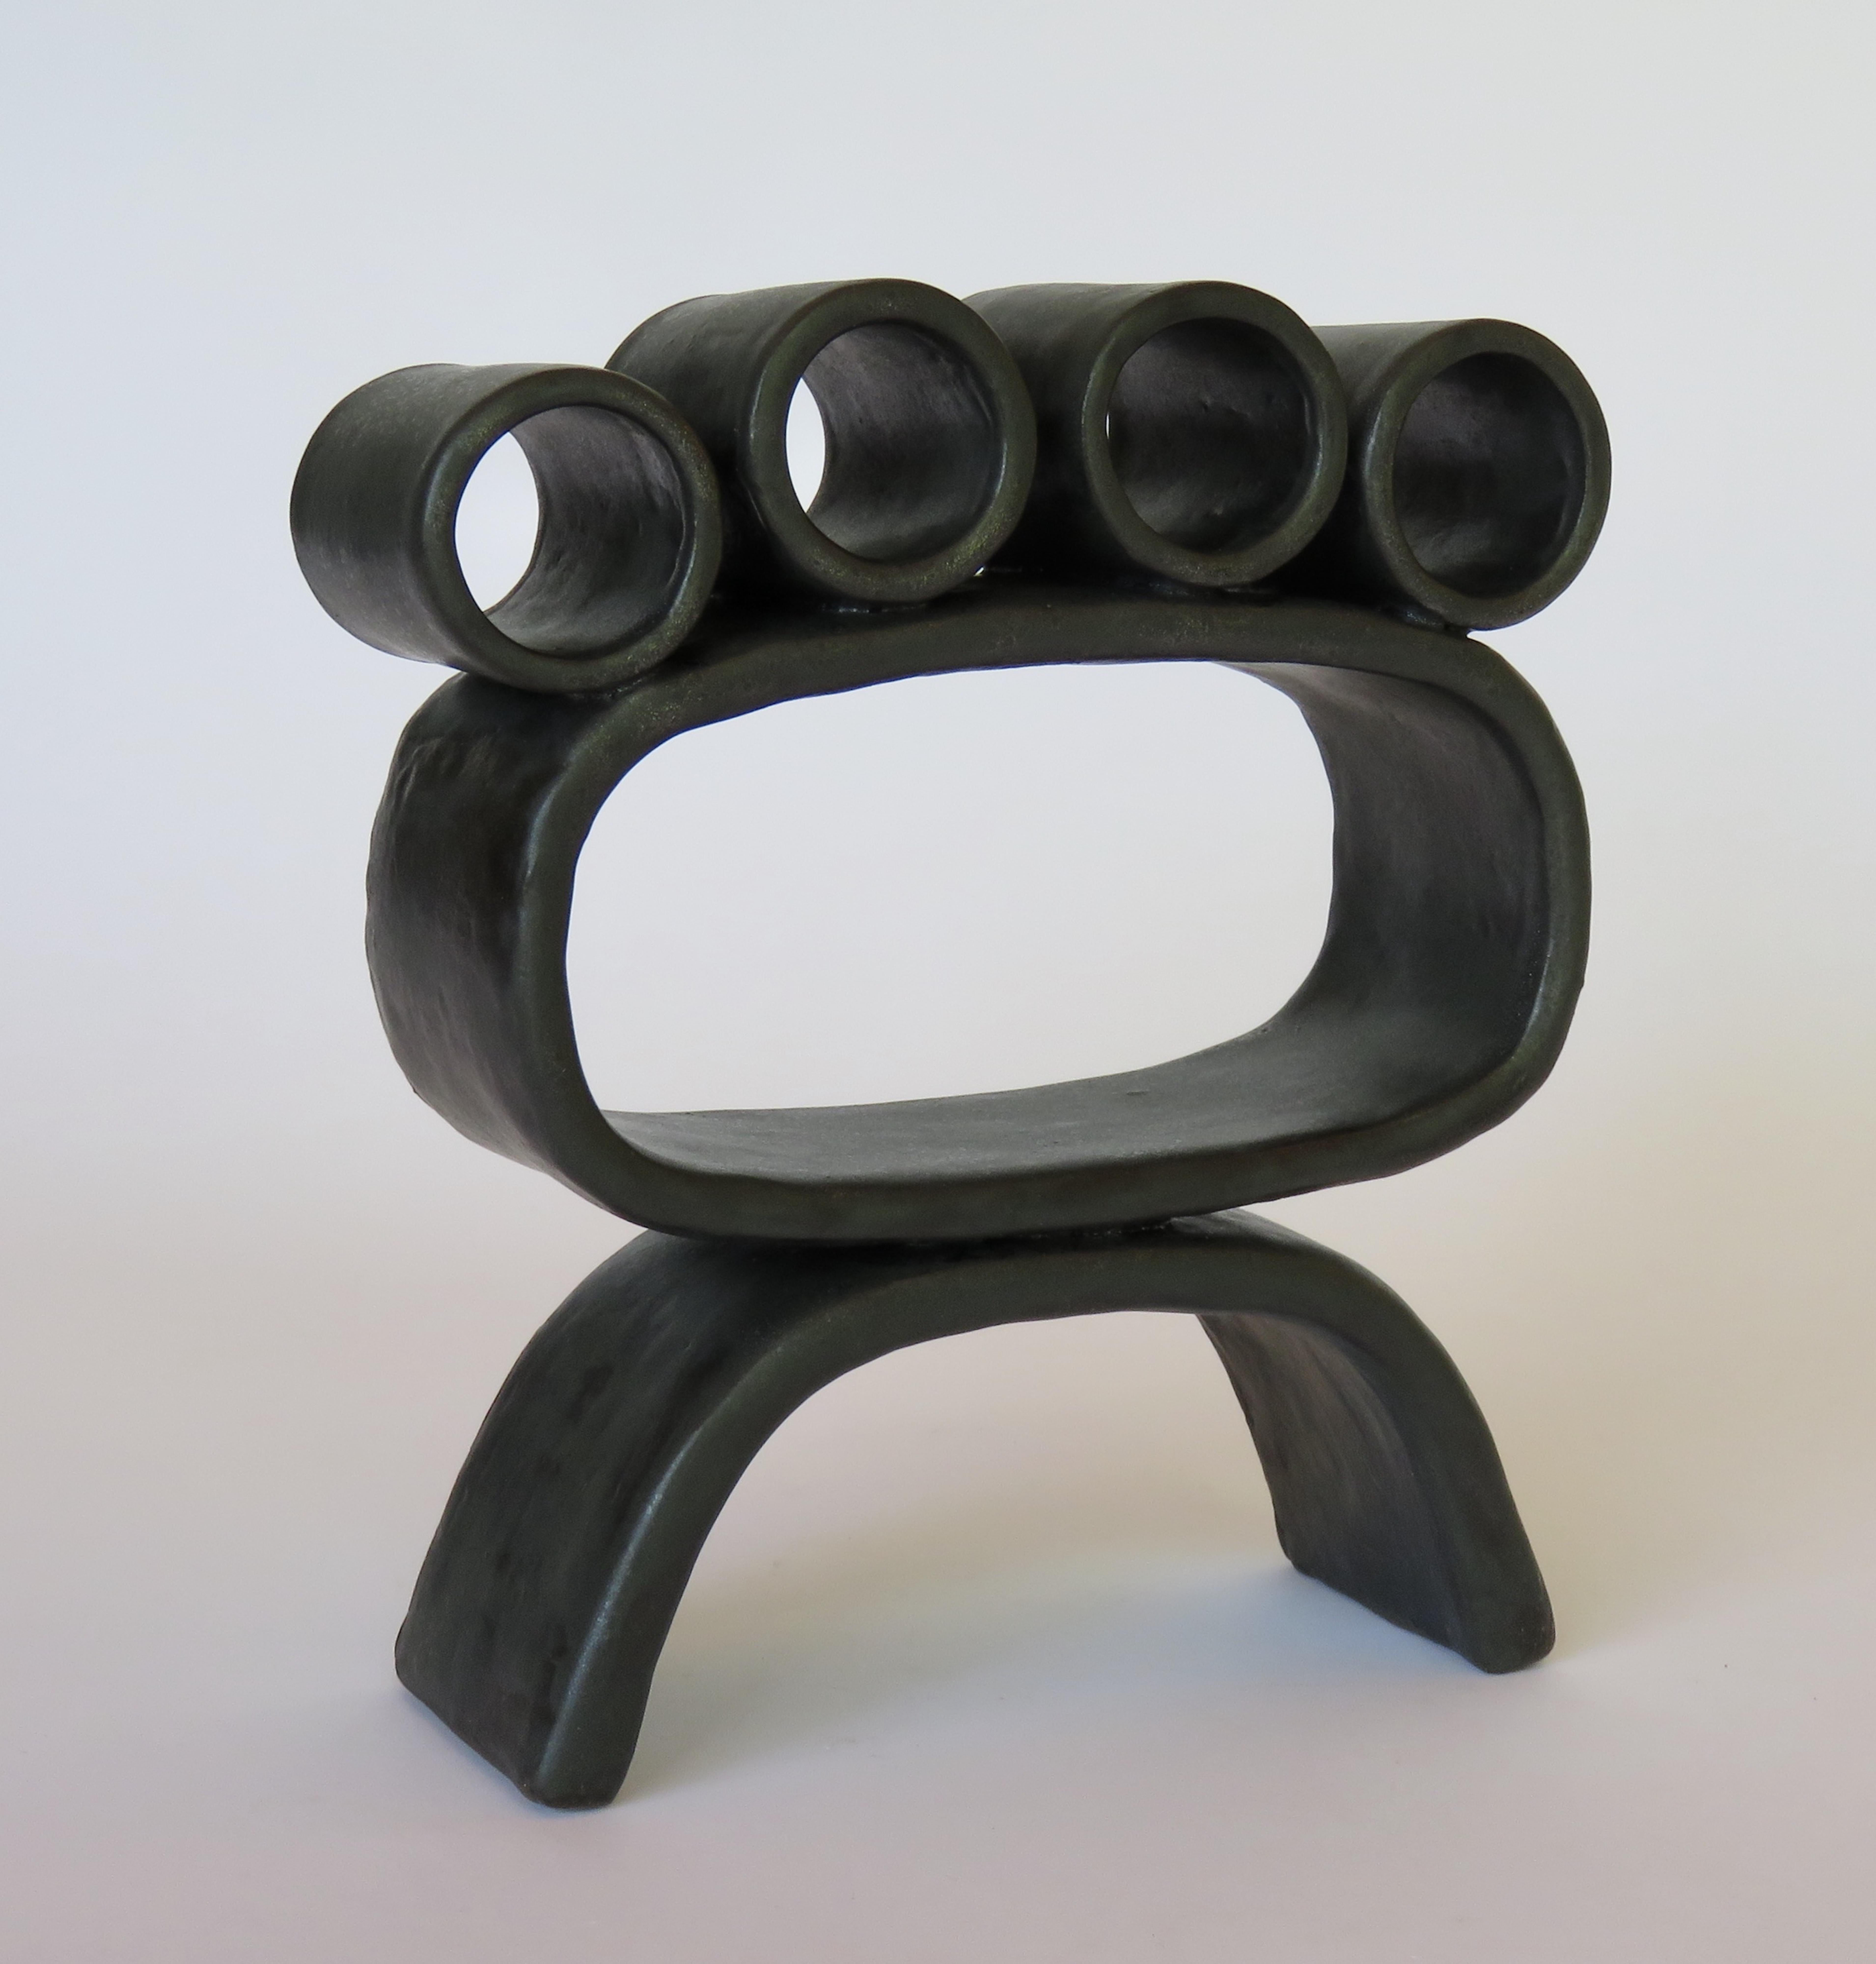 Glazed Metallic Black Hand-Built Ceramic Sculpture with Small Rings on Legs